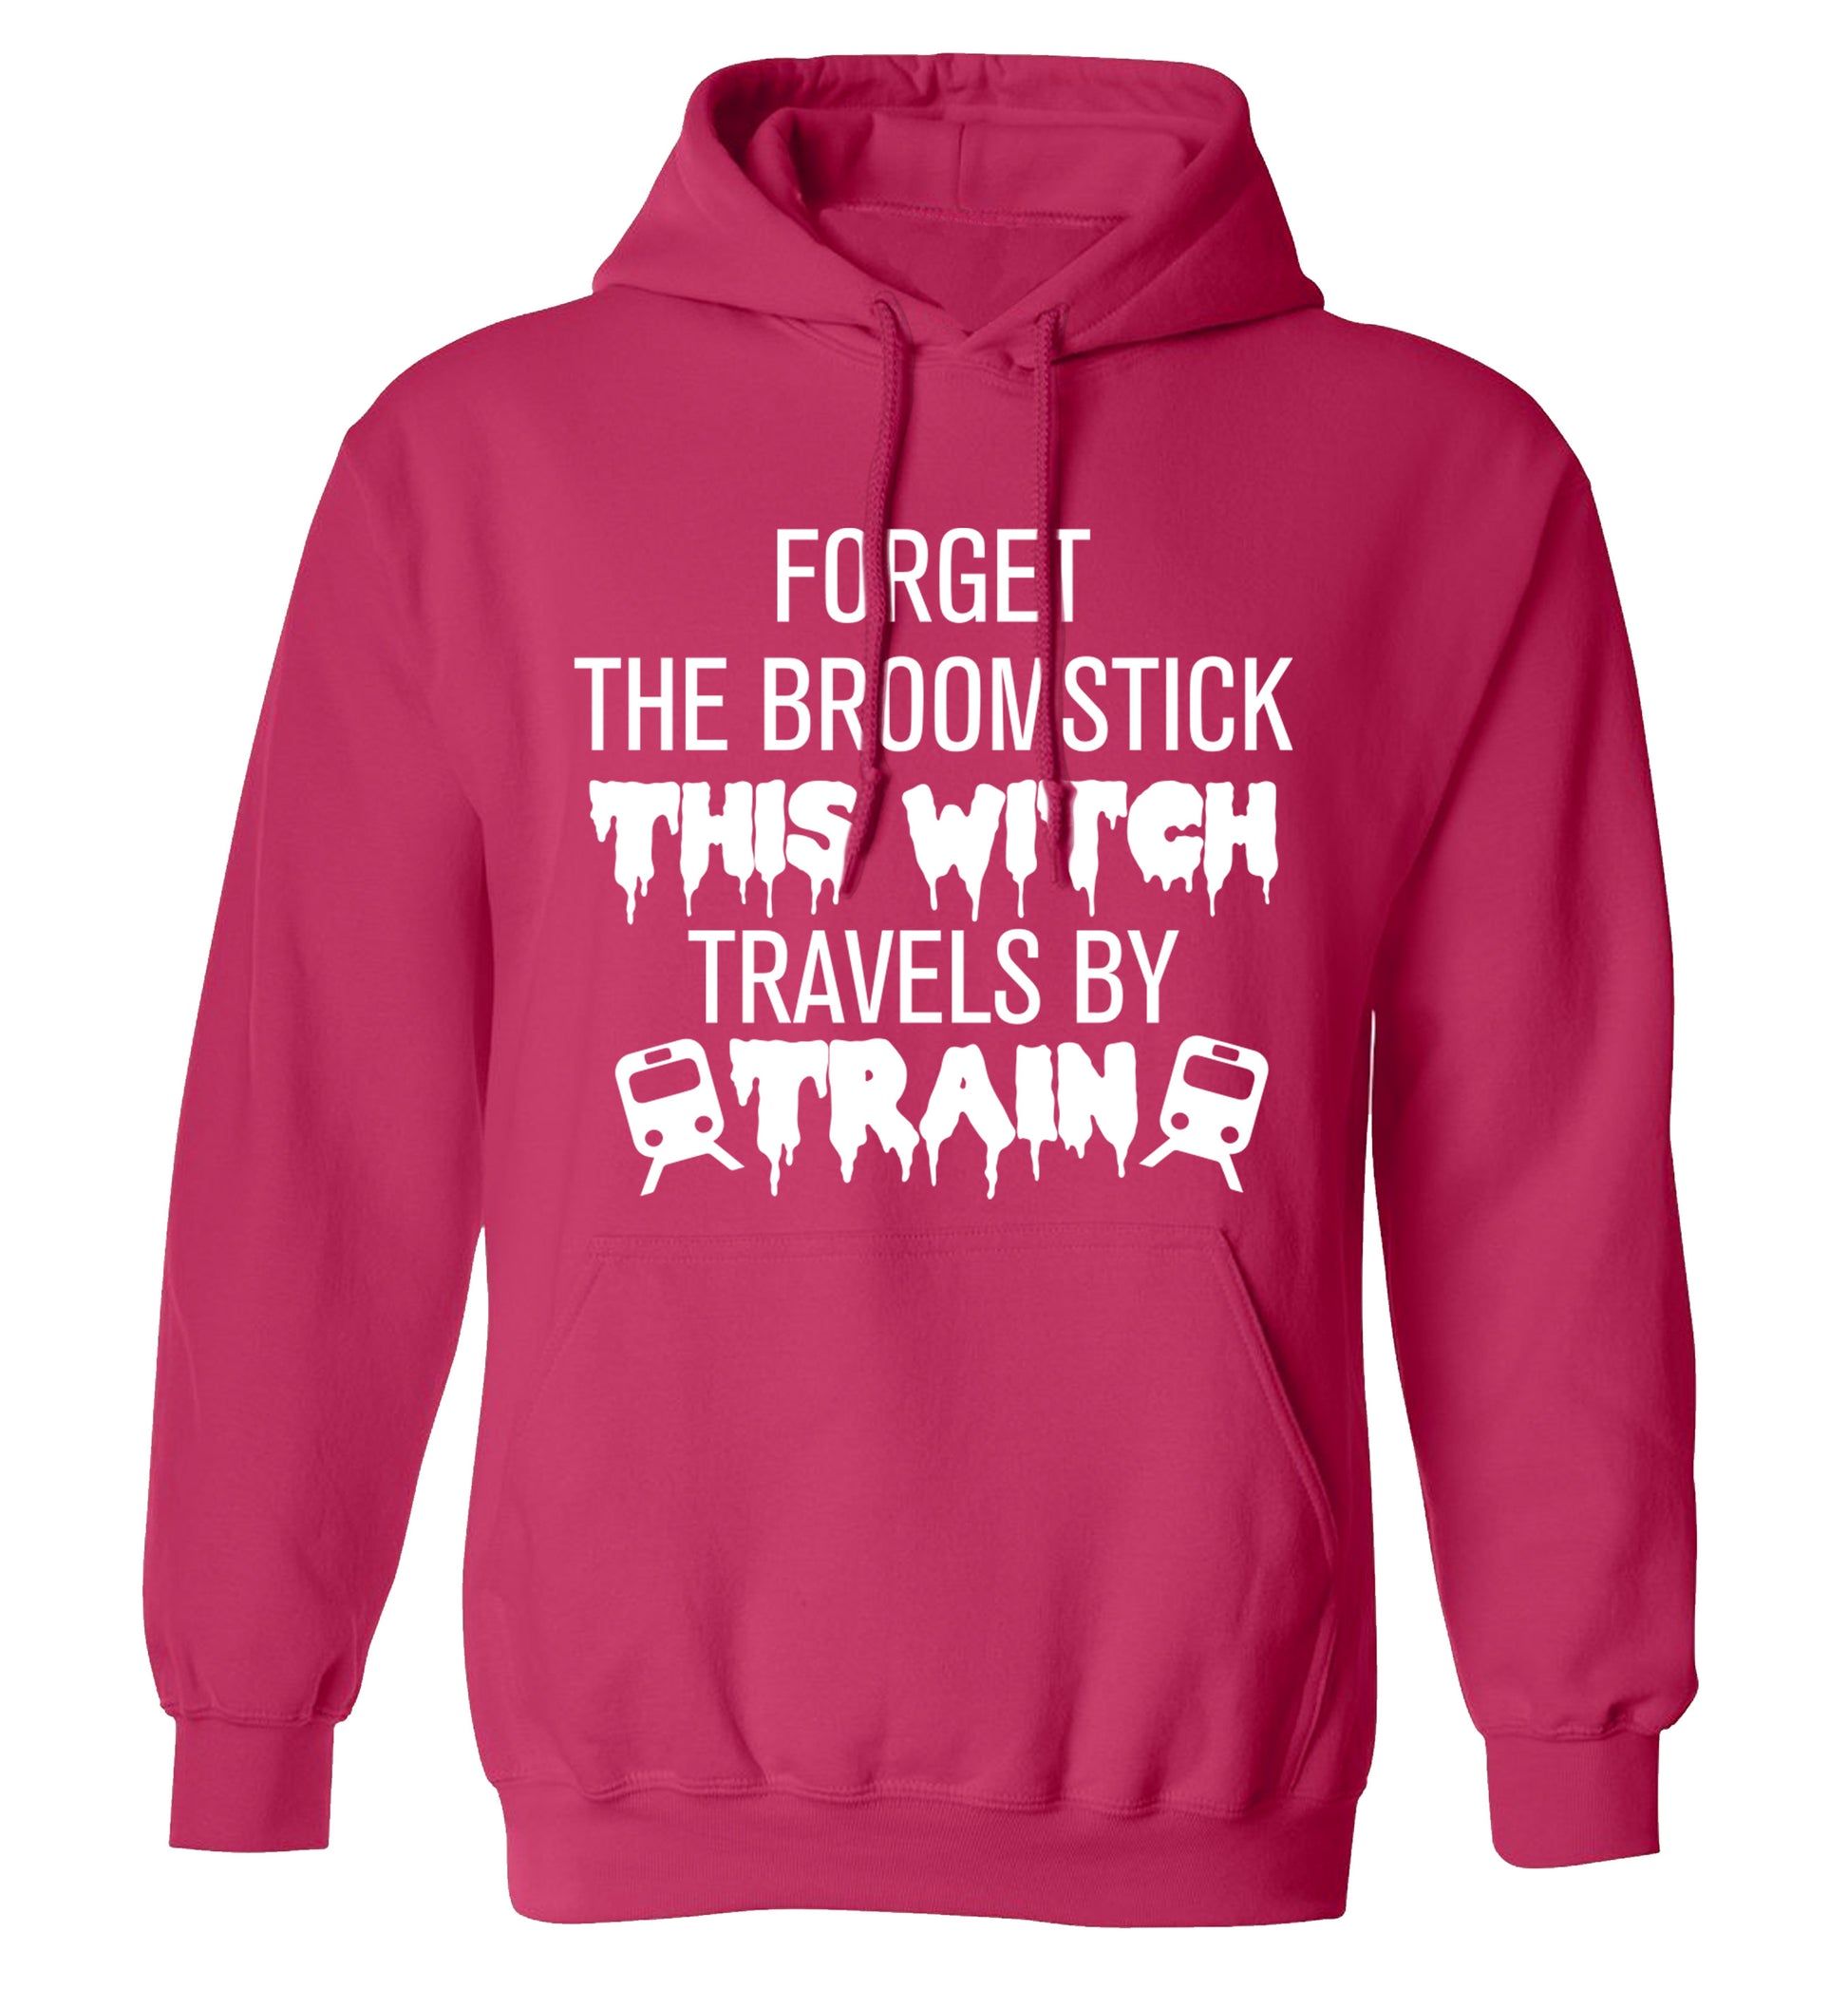 Forget the broomstick this witch travels by train adults unisexpink hoodie 2XL